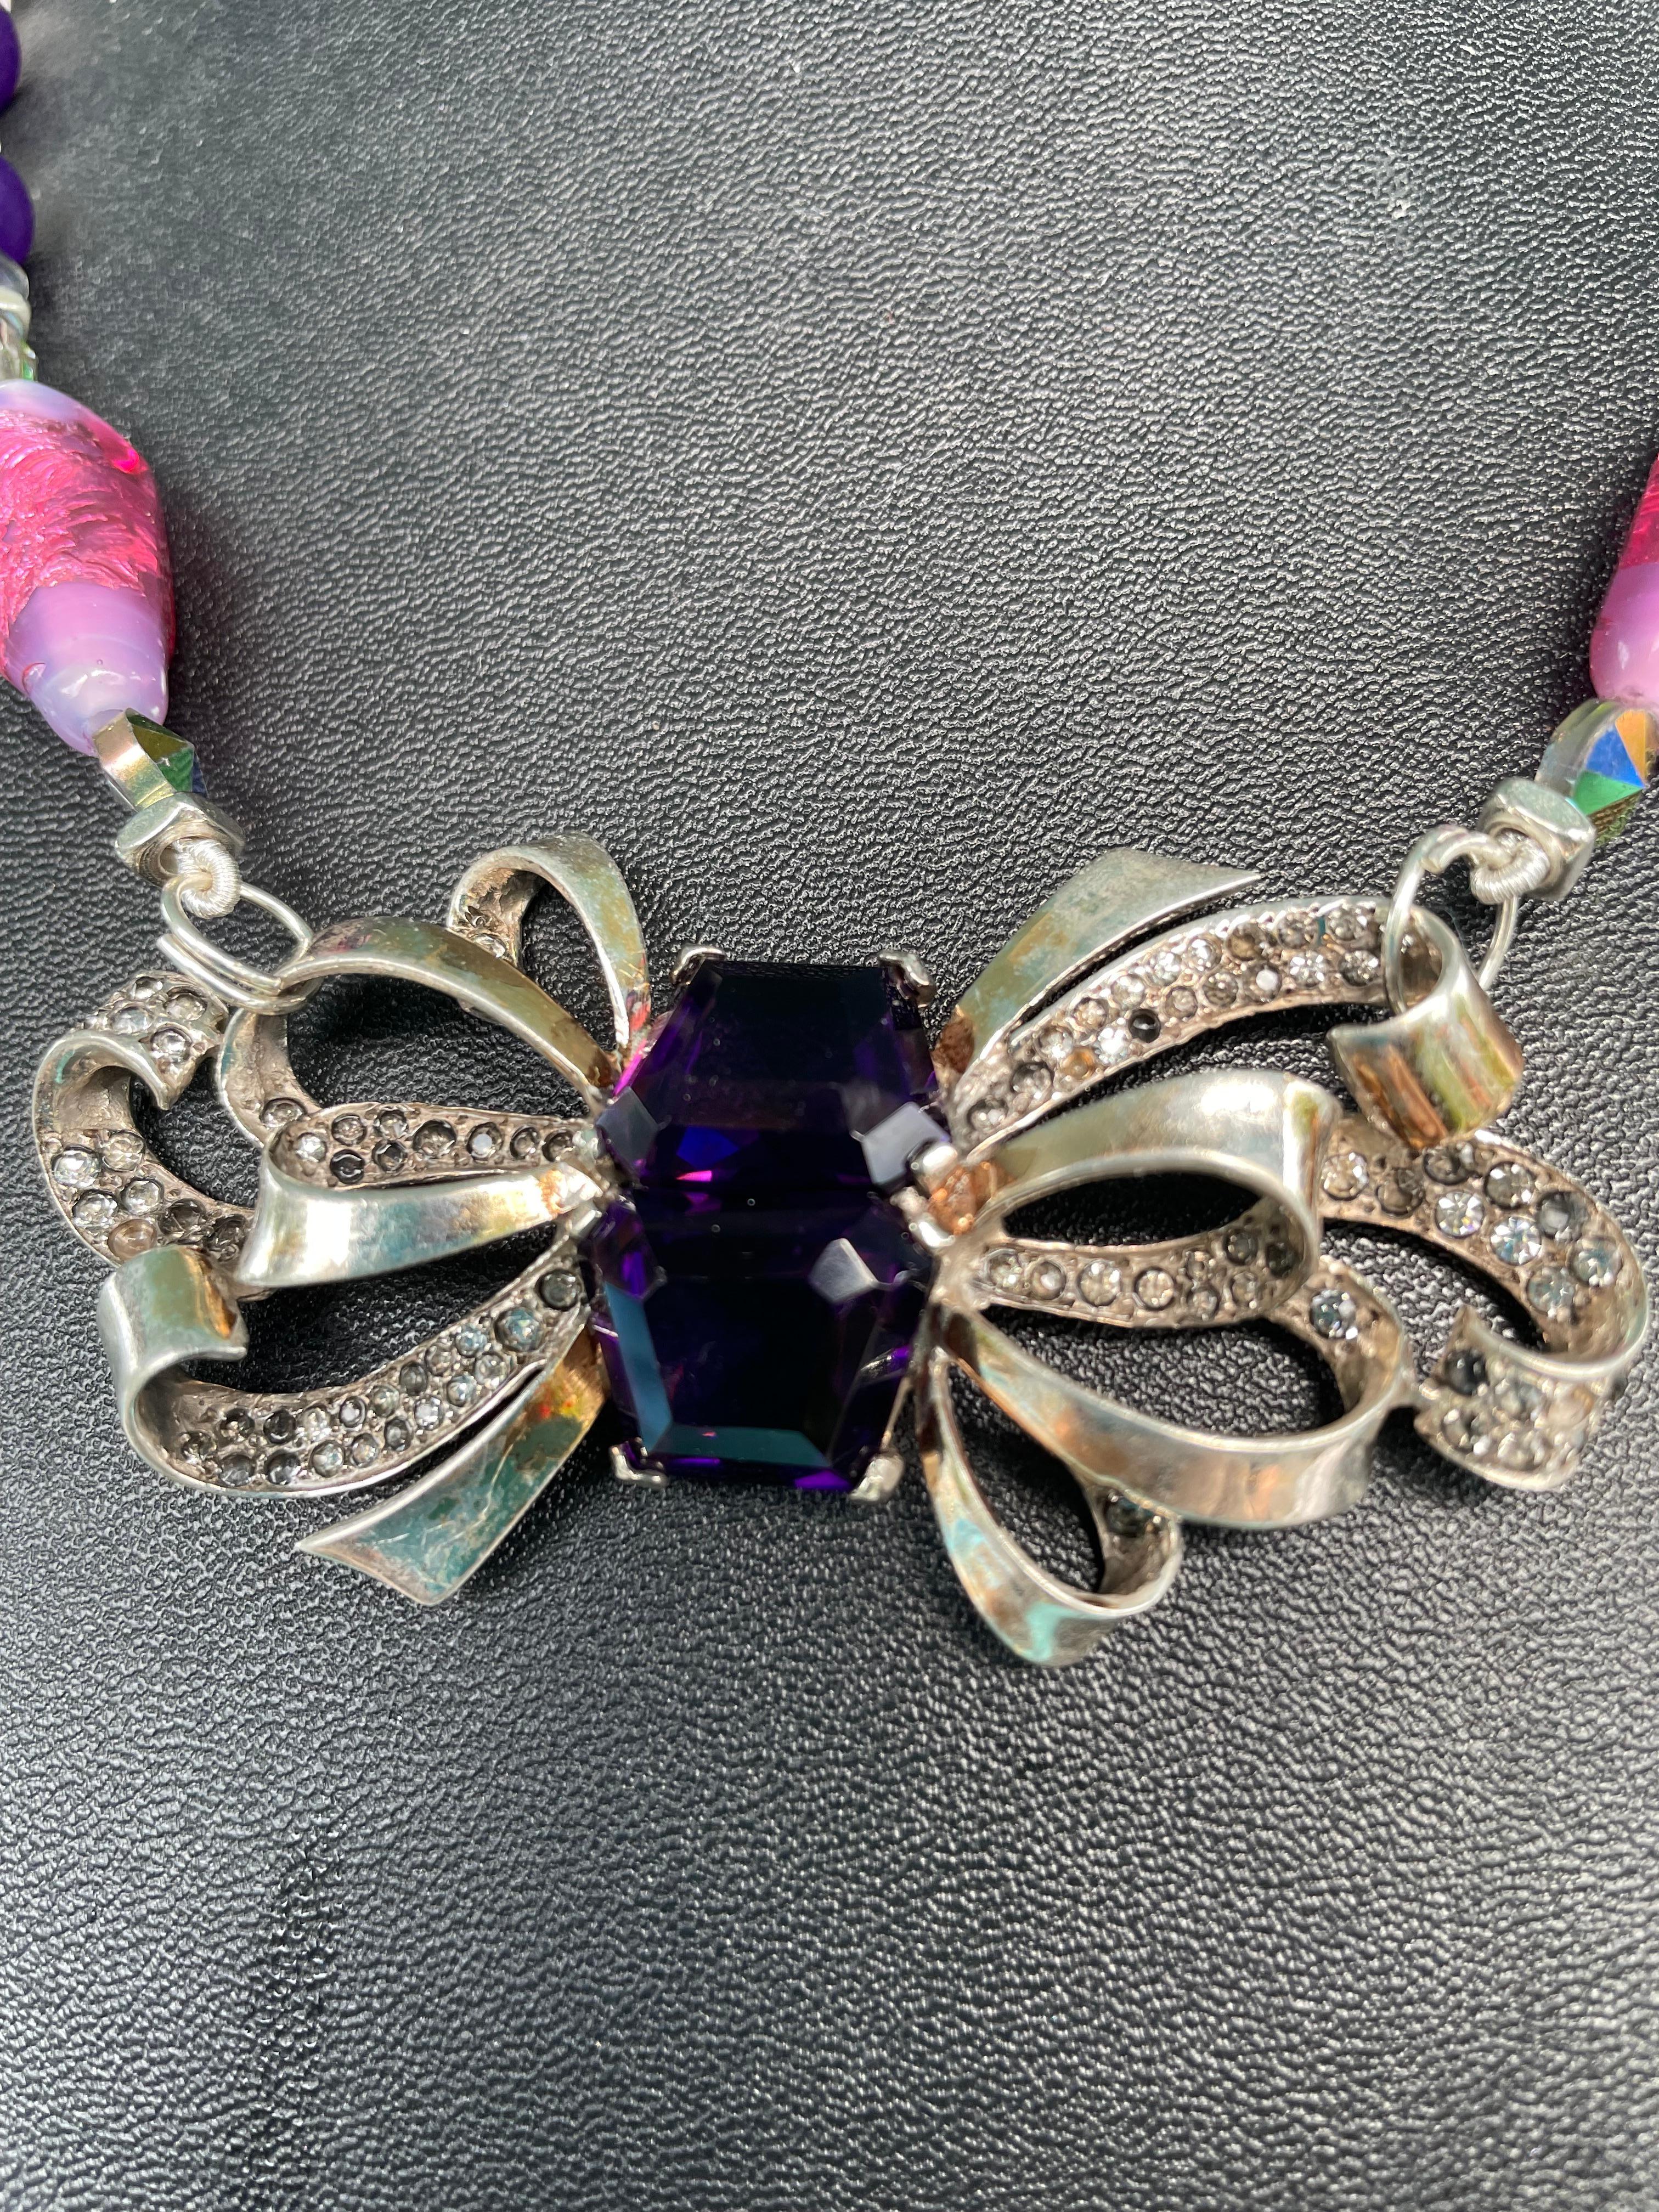 Lorraine’s Bijoux Vintage Sterling Silver Art Nouveau Bow brooch , one of a kind, handmade necklace is on offer. This vintage, elegant, feminine, bow brooch is enhanced with marcasite and two large emerald cut glass amethyst stones that sparkle and